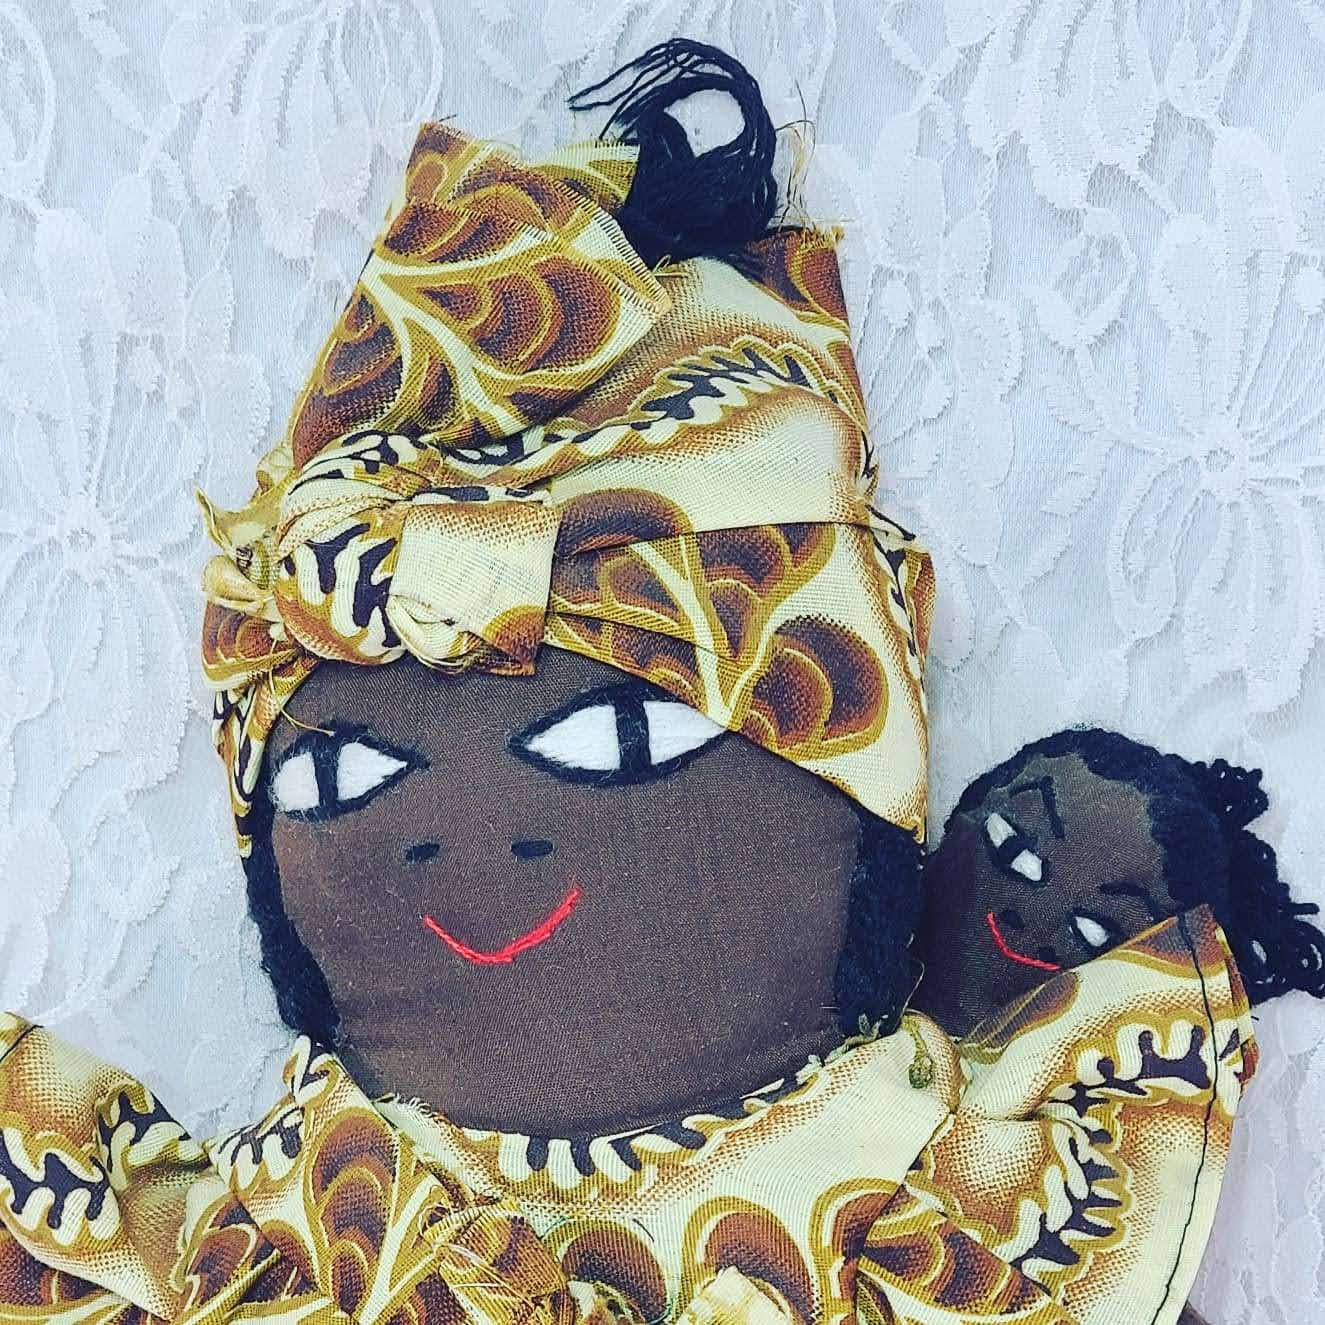 Vintage Homemade Cloth Doll 20" African American Momma with Child and Rhinoceros and Zebra ~ HAND SEWN